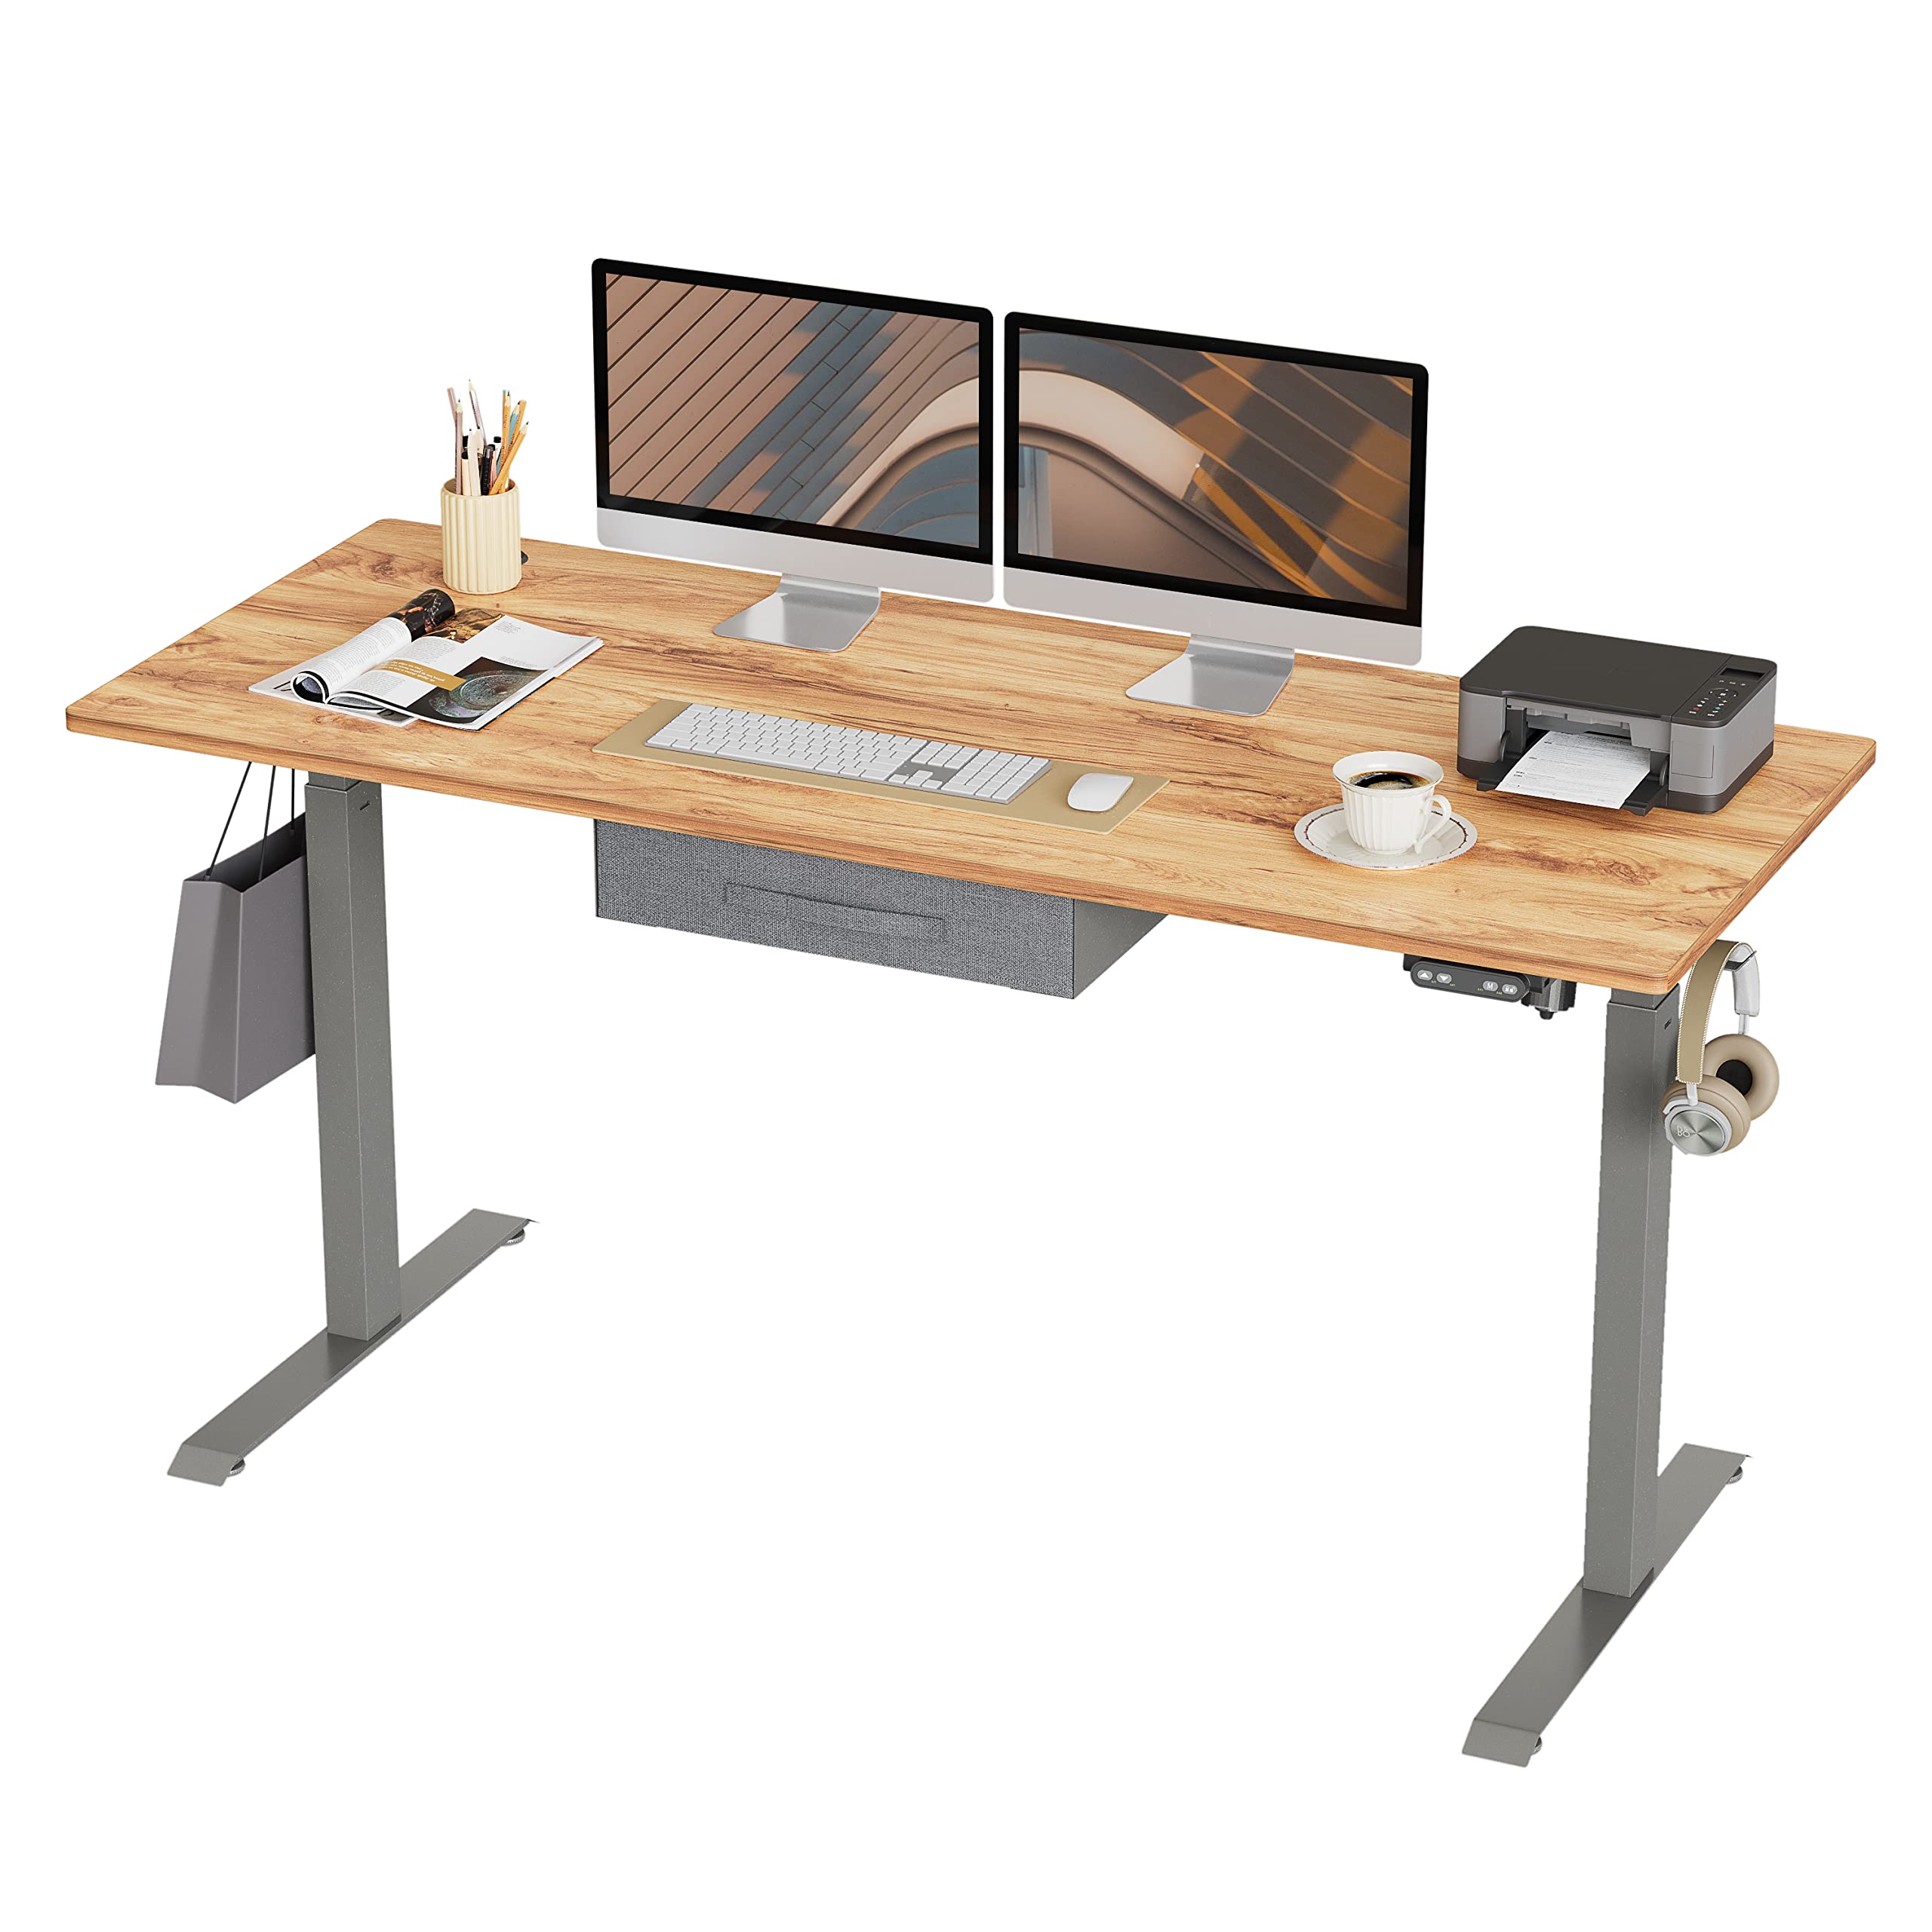 BANTI Adjustable Height Standing Desk with Drawers, 63x24 Inches Electric Stand Up Desk, Sit Stand Home Office Desk with Gray Frame/Light Rustic Br...